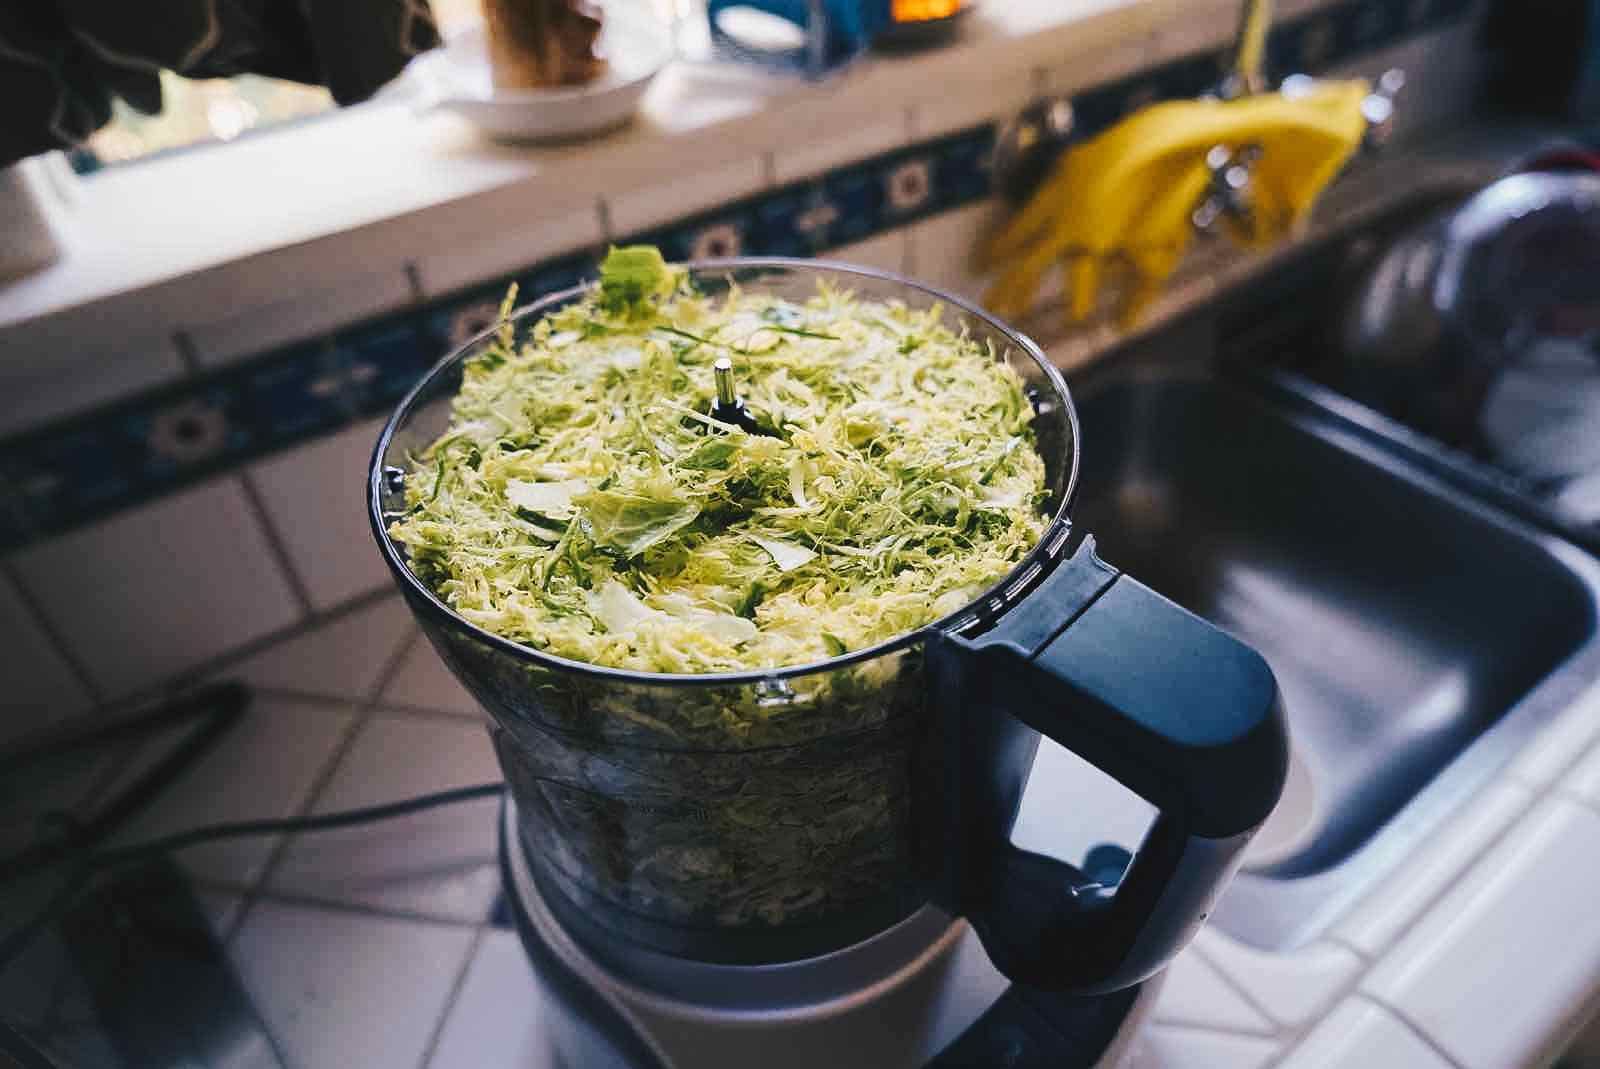 https://storables.com/wp-content/uploads/2023/07/how-to-shred-brussel-sprouts-in-a-food-processor-1690715051.jpeg